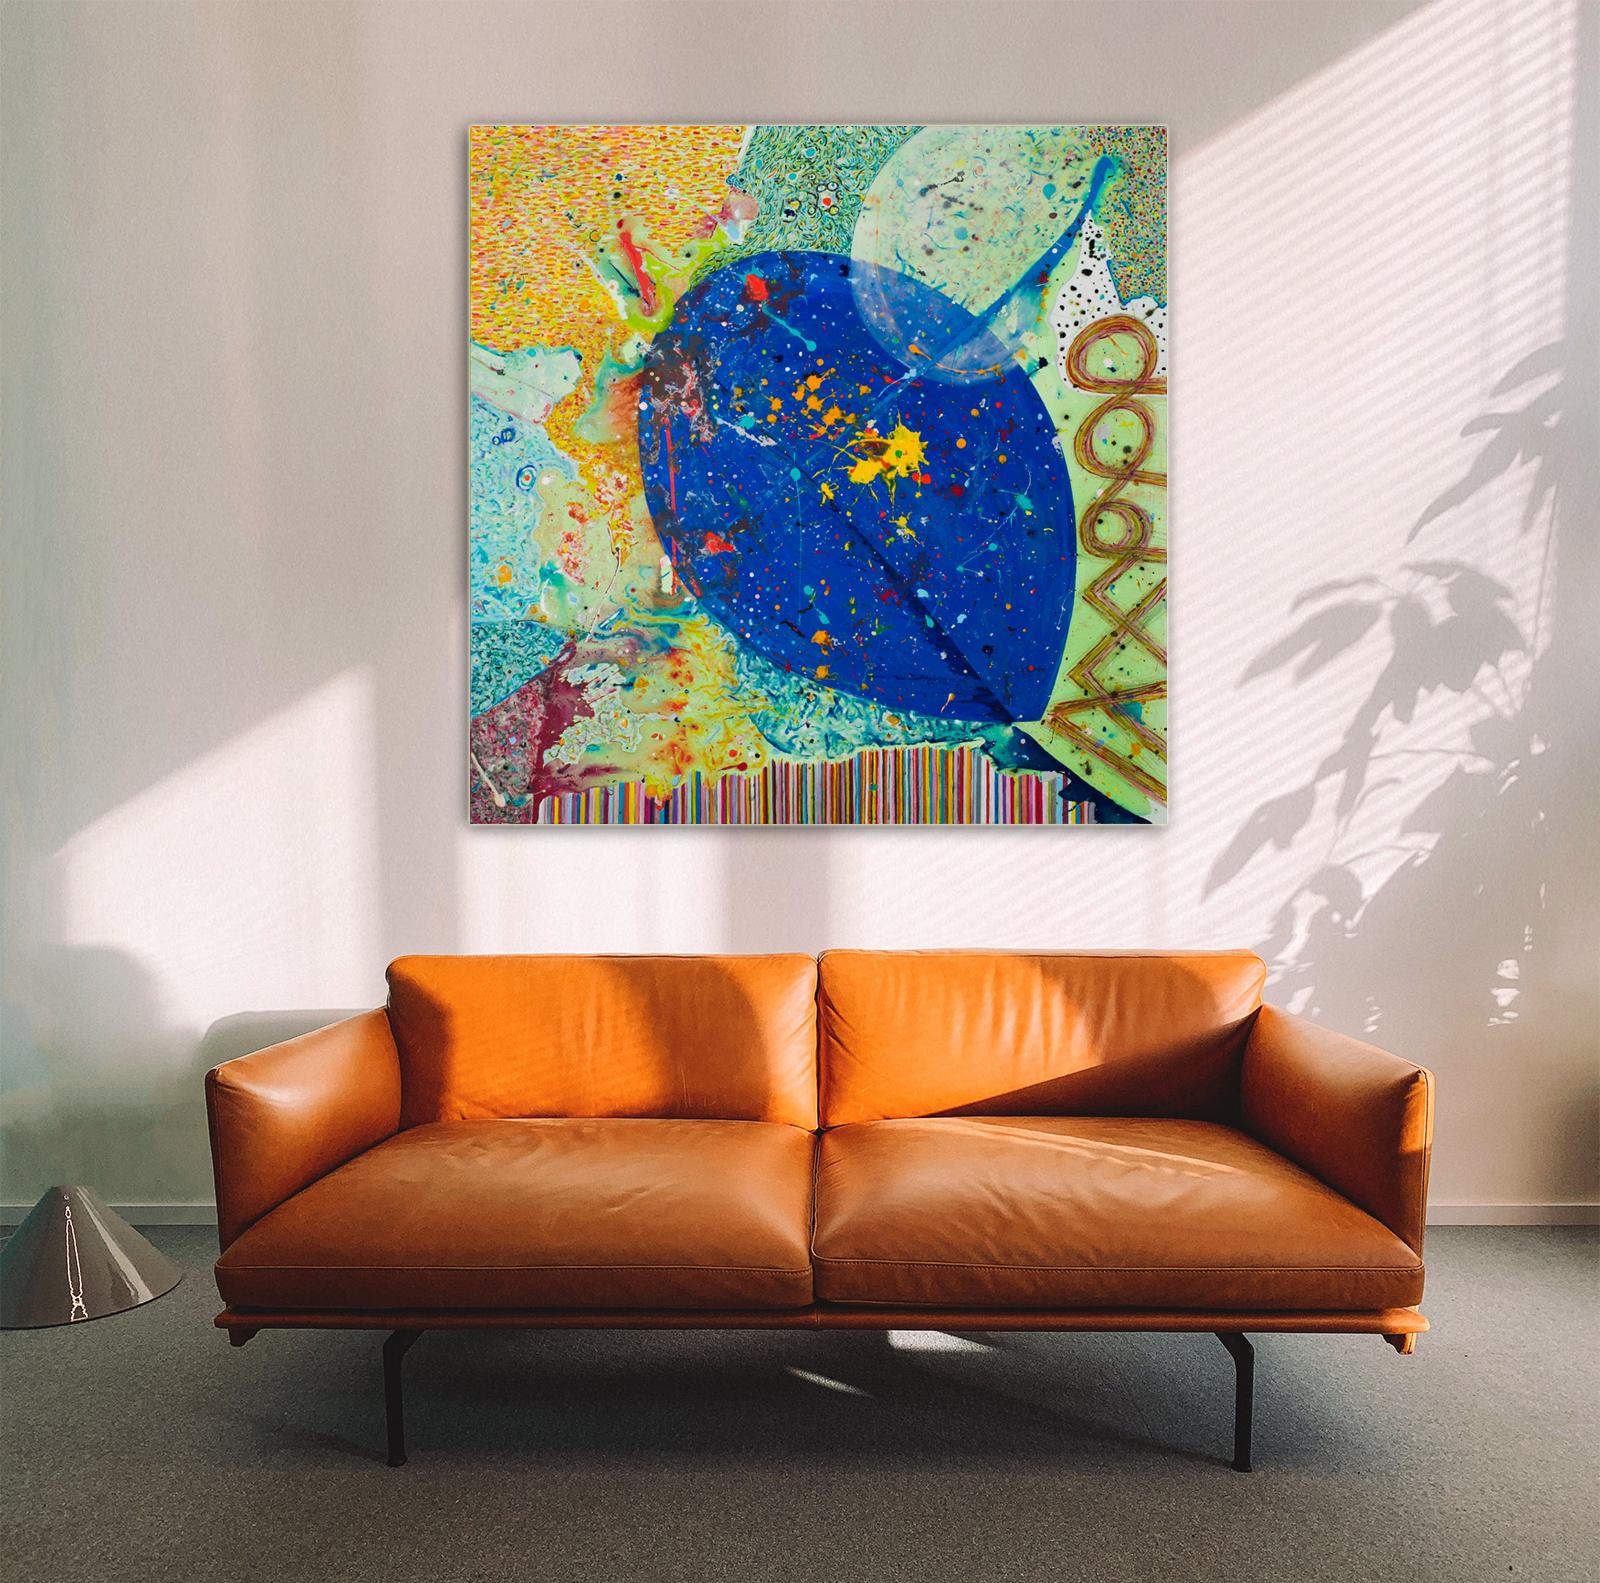 Artist: Detlef E. Aderhold

Medium: Mixed Media on Canvas

Edition: Original Artwork


About the Artist:

Detlef E. Aderhold is a contemporary abstract painter from Germany.

